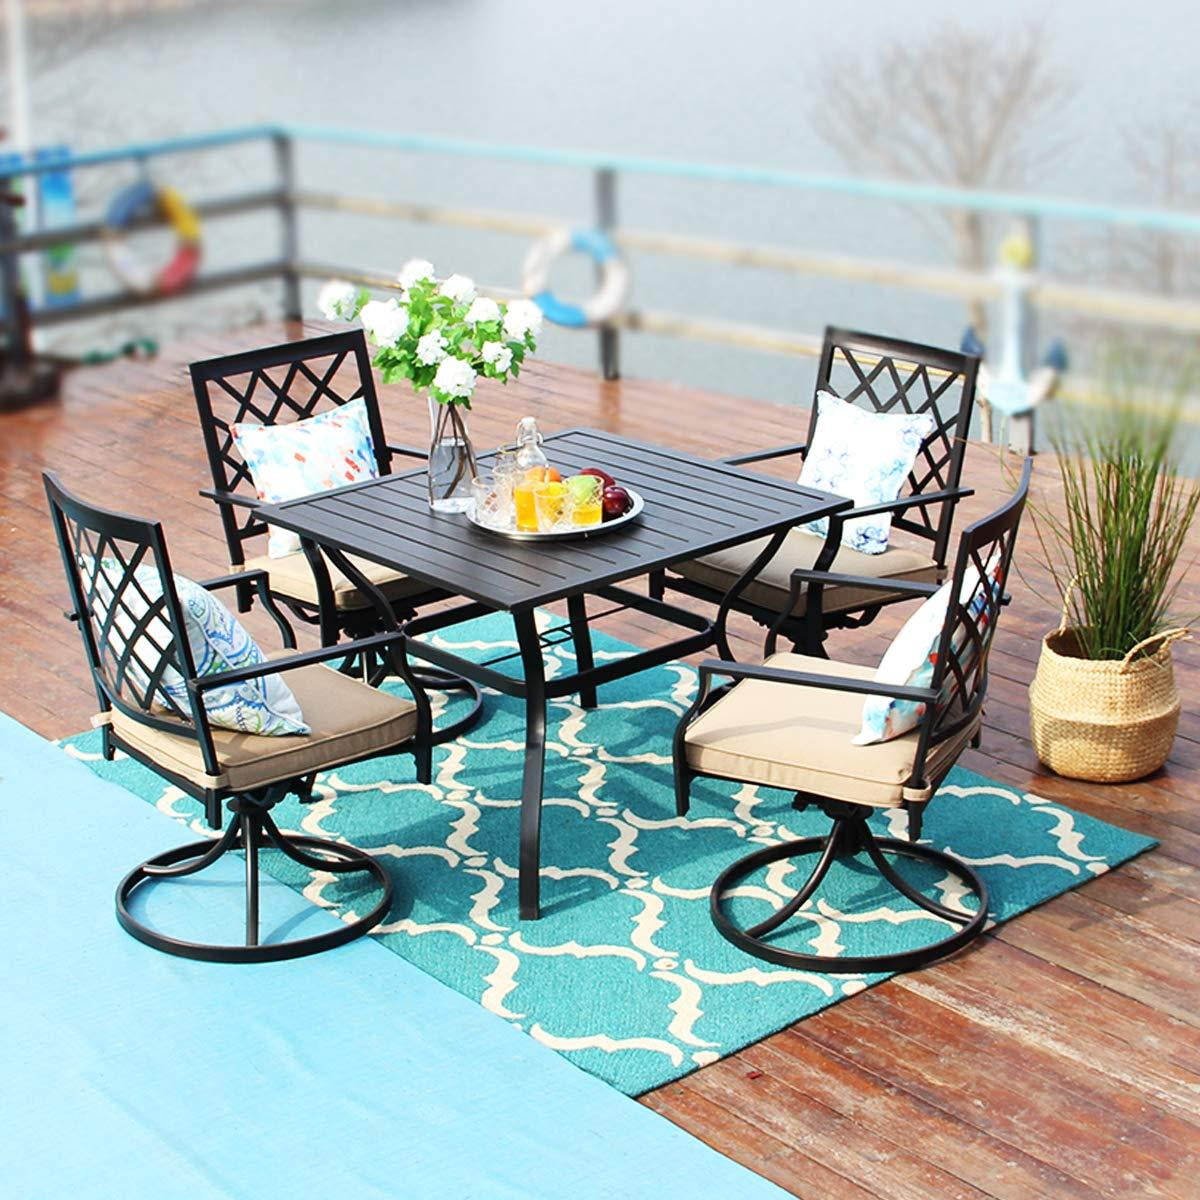  garden furniture table and chairs